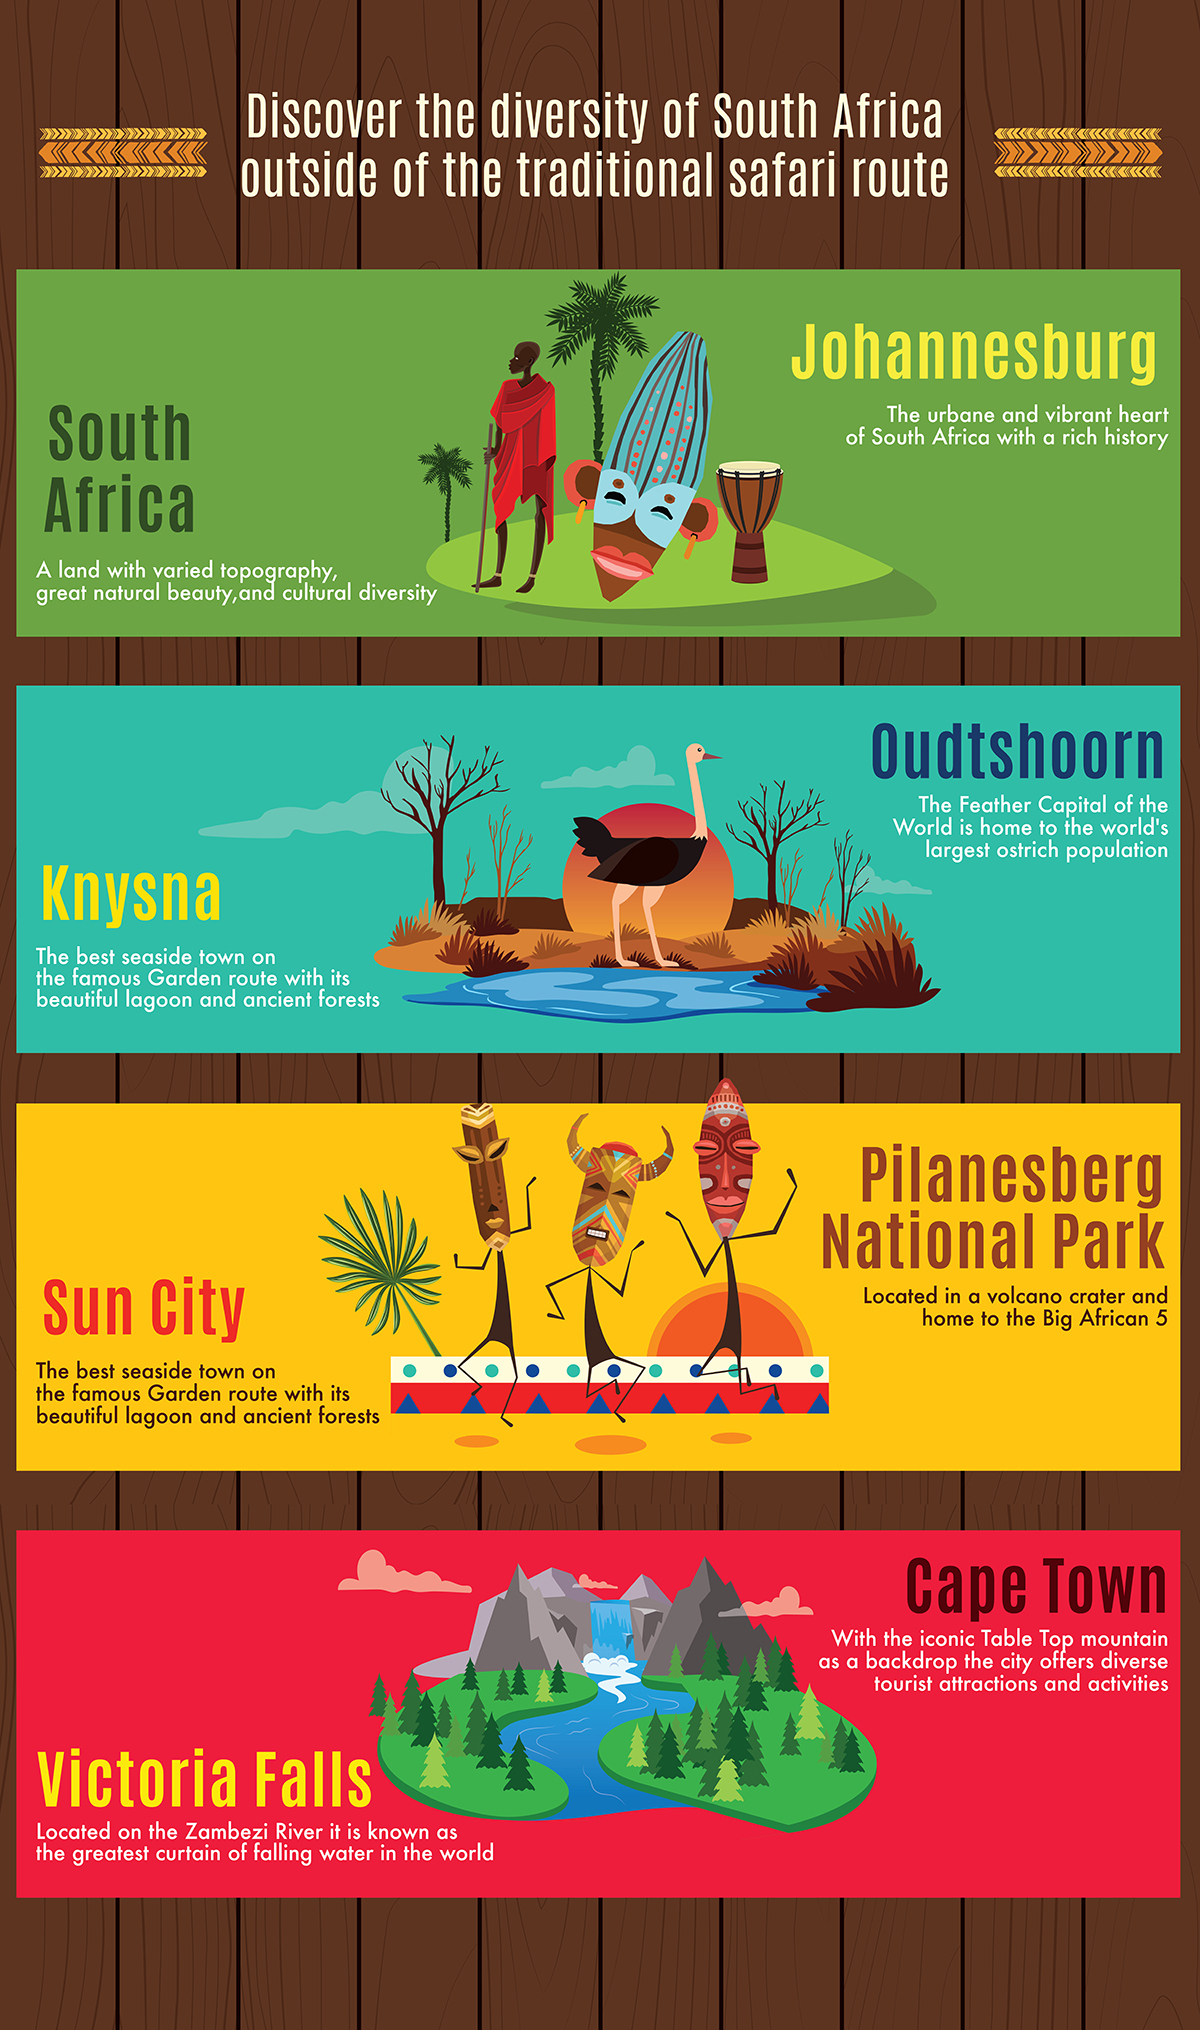 South Africa, Culture, Facts & Travel